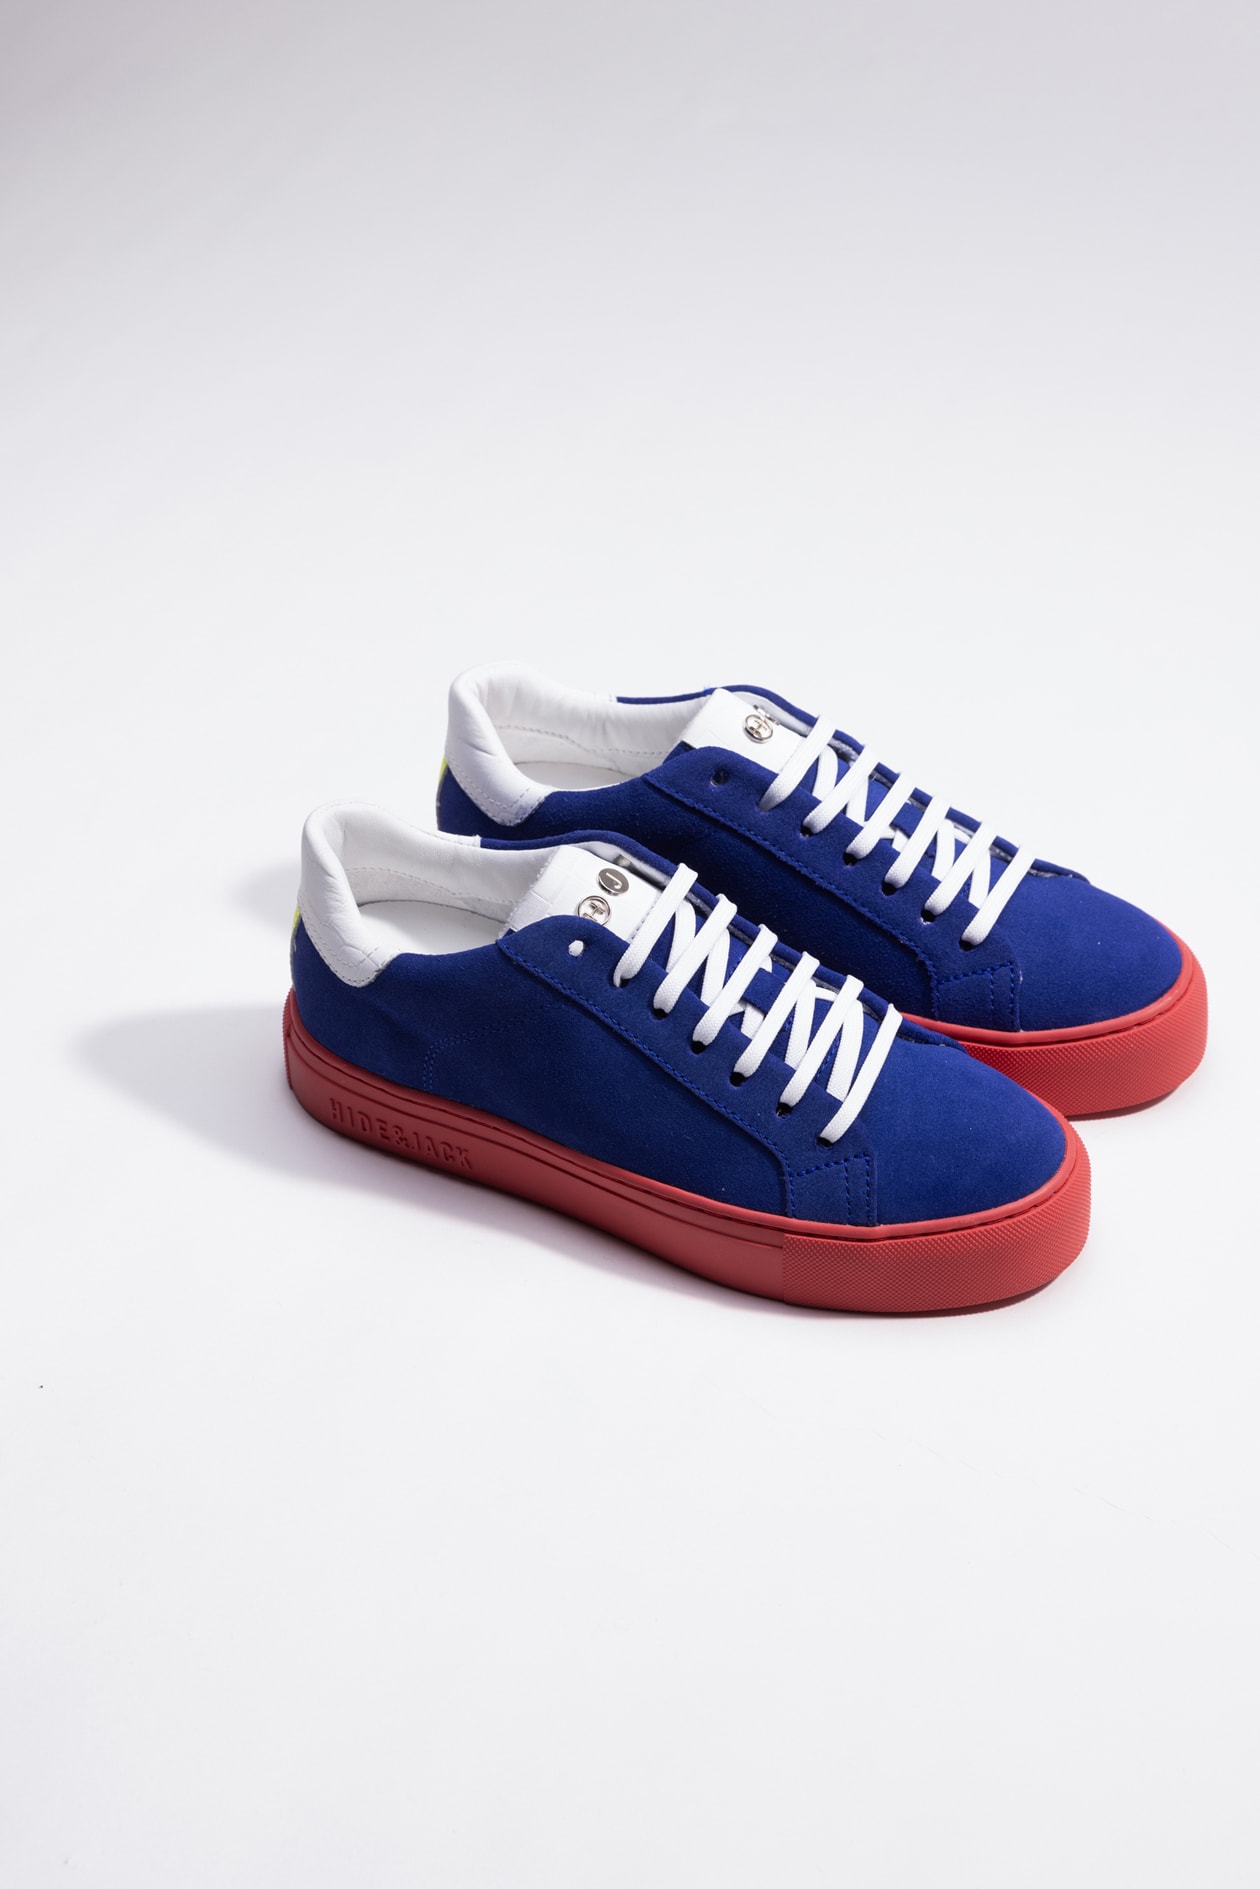 Hide&amp;jack Low Top Trainer - Essence Oil Azure Red In White